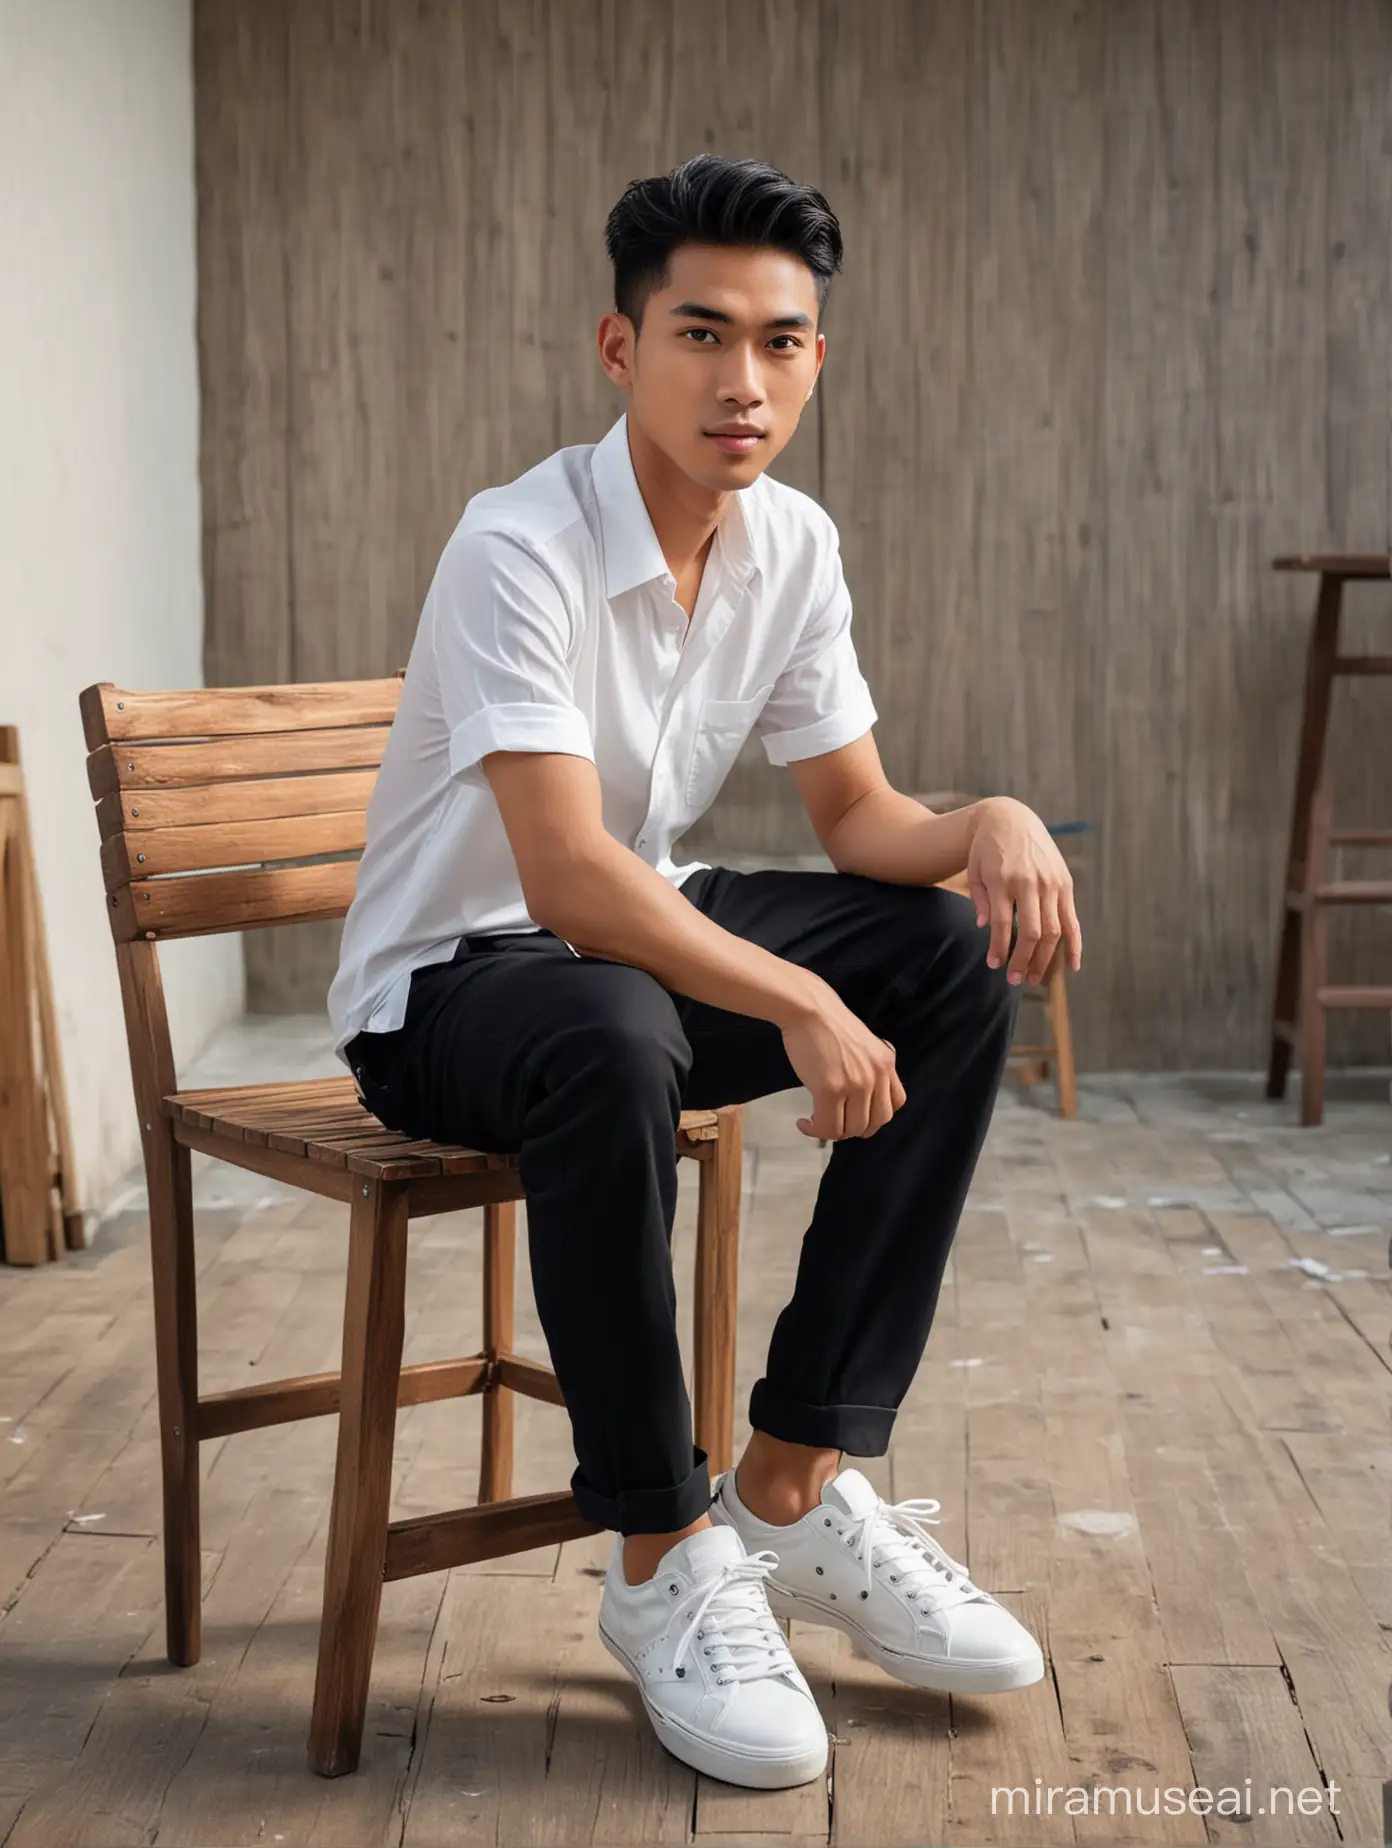 Young Indonesian Man Sitting on Wooden Chair Against Building Background